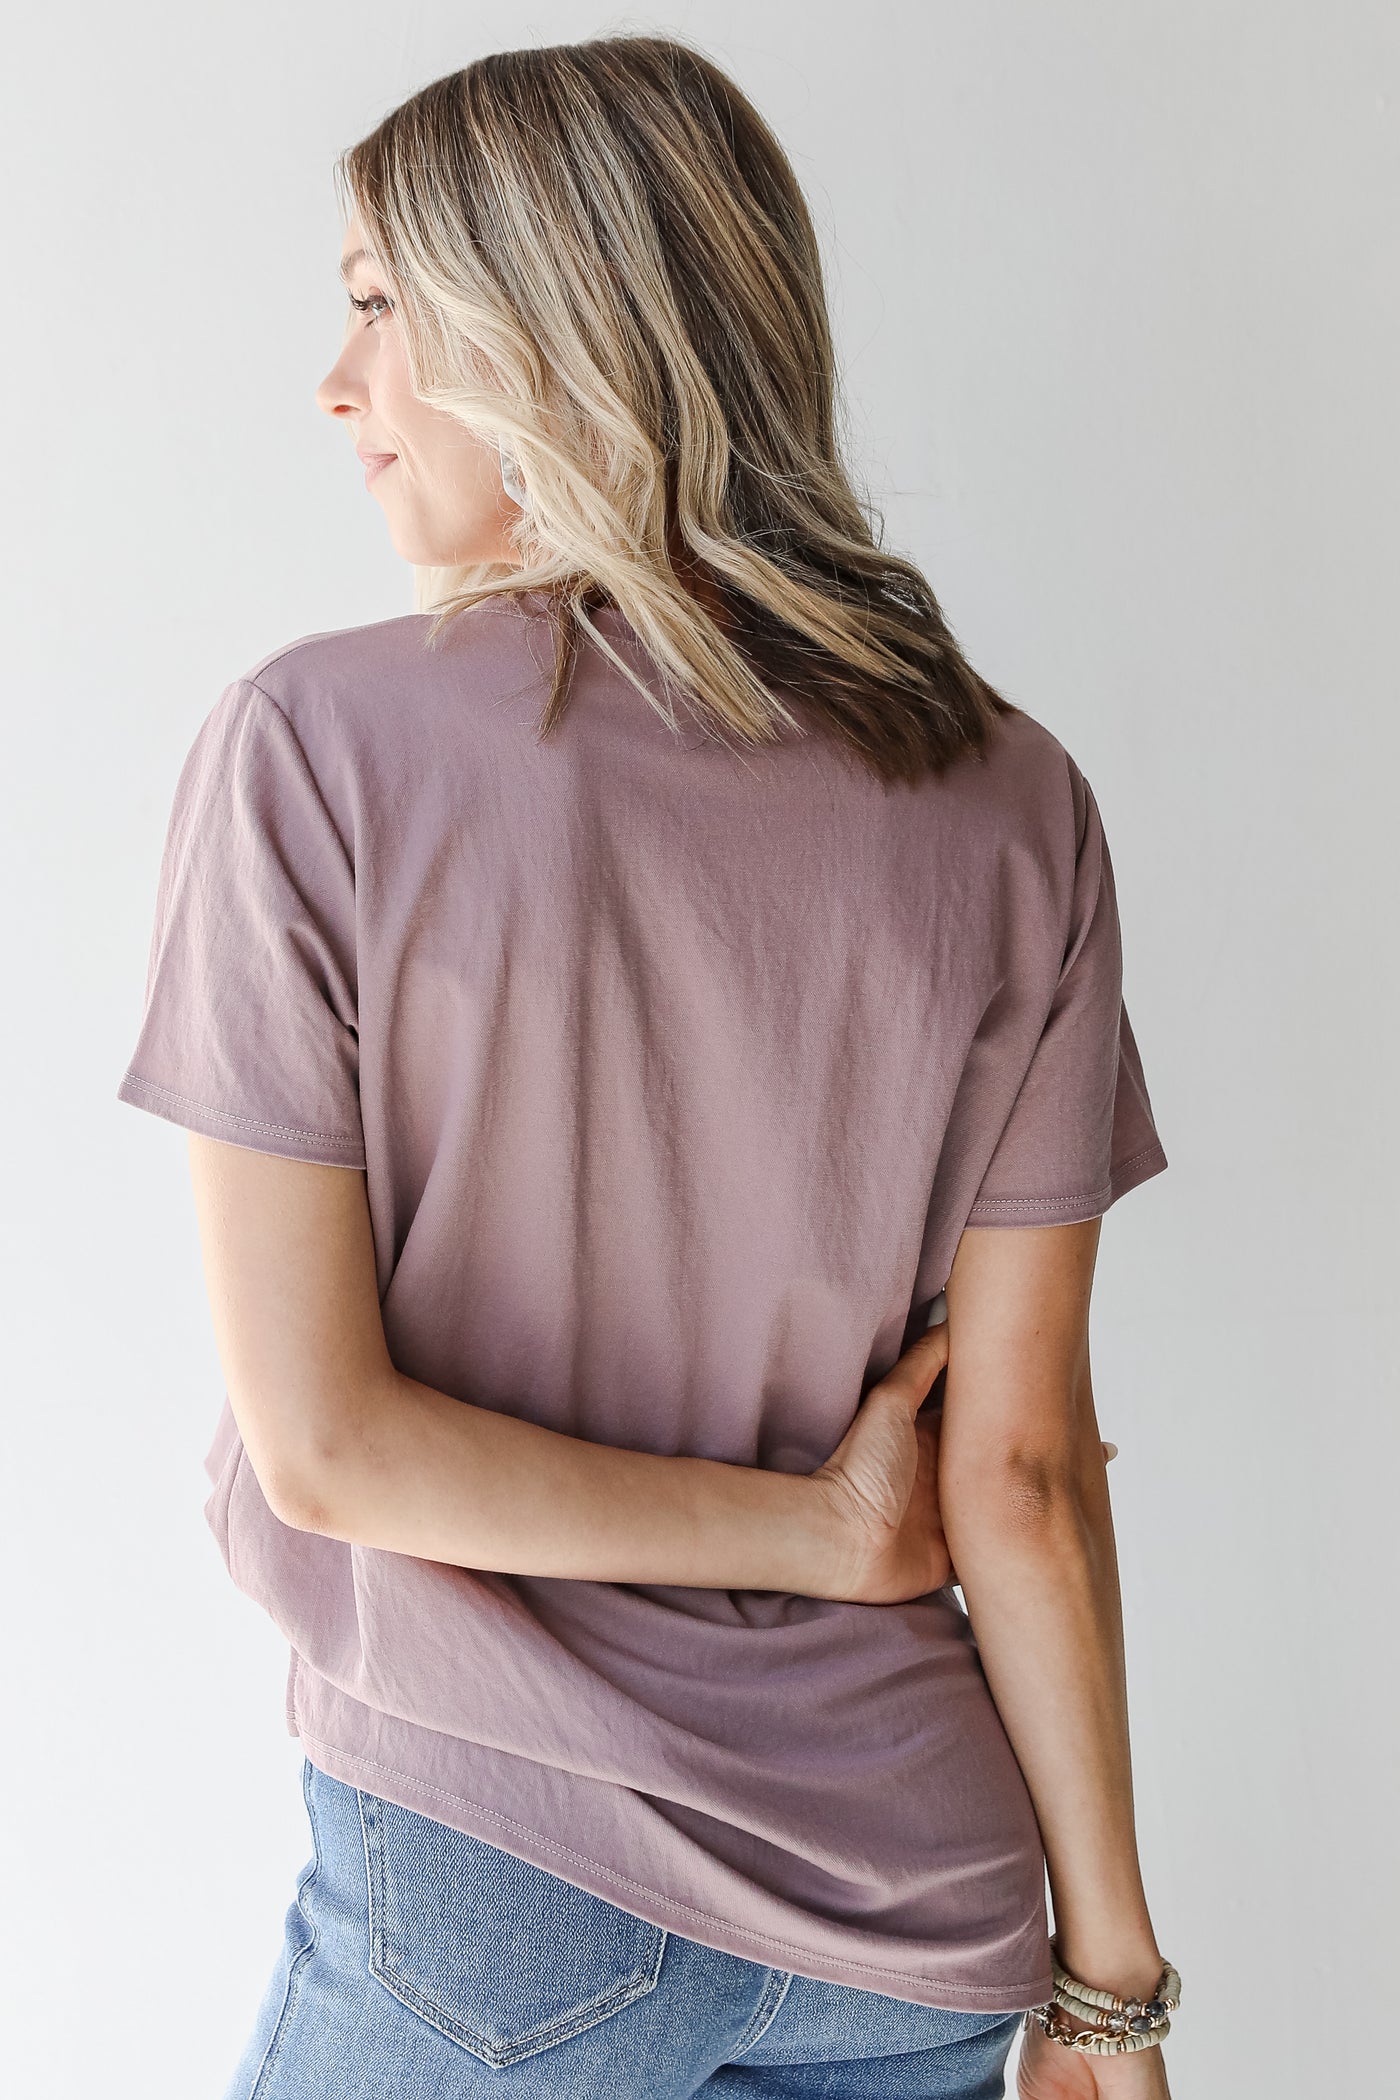 Basic Tee in lavender back view